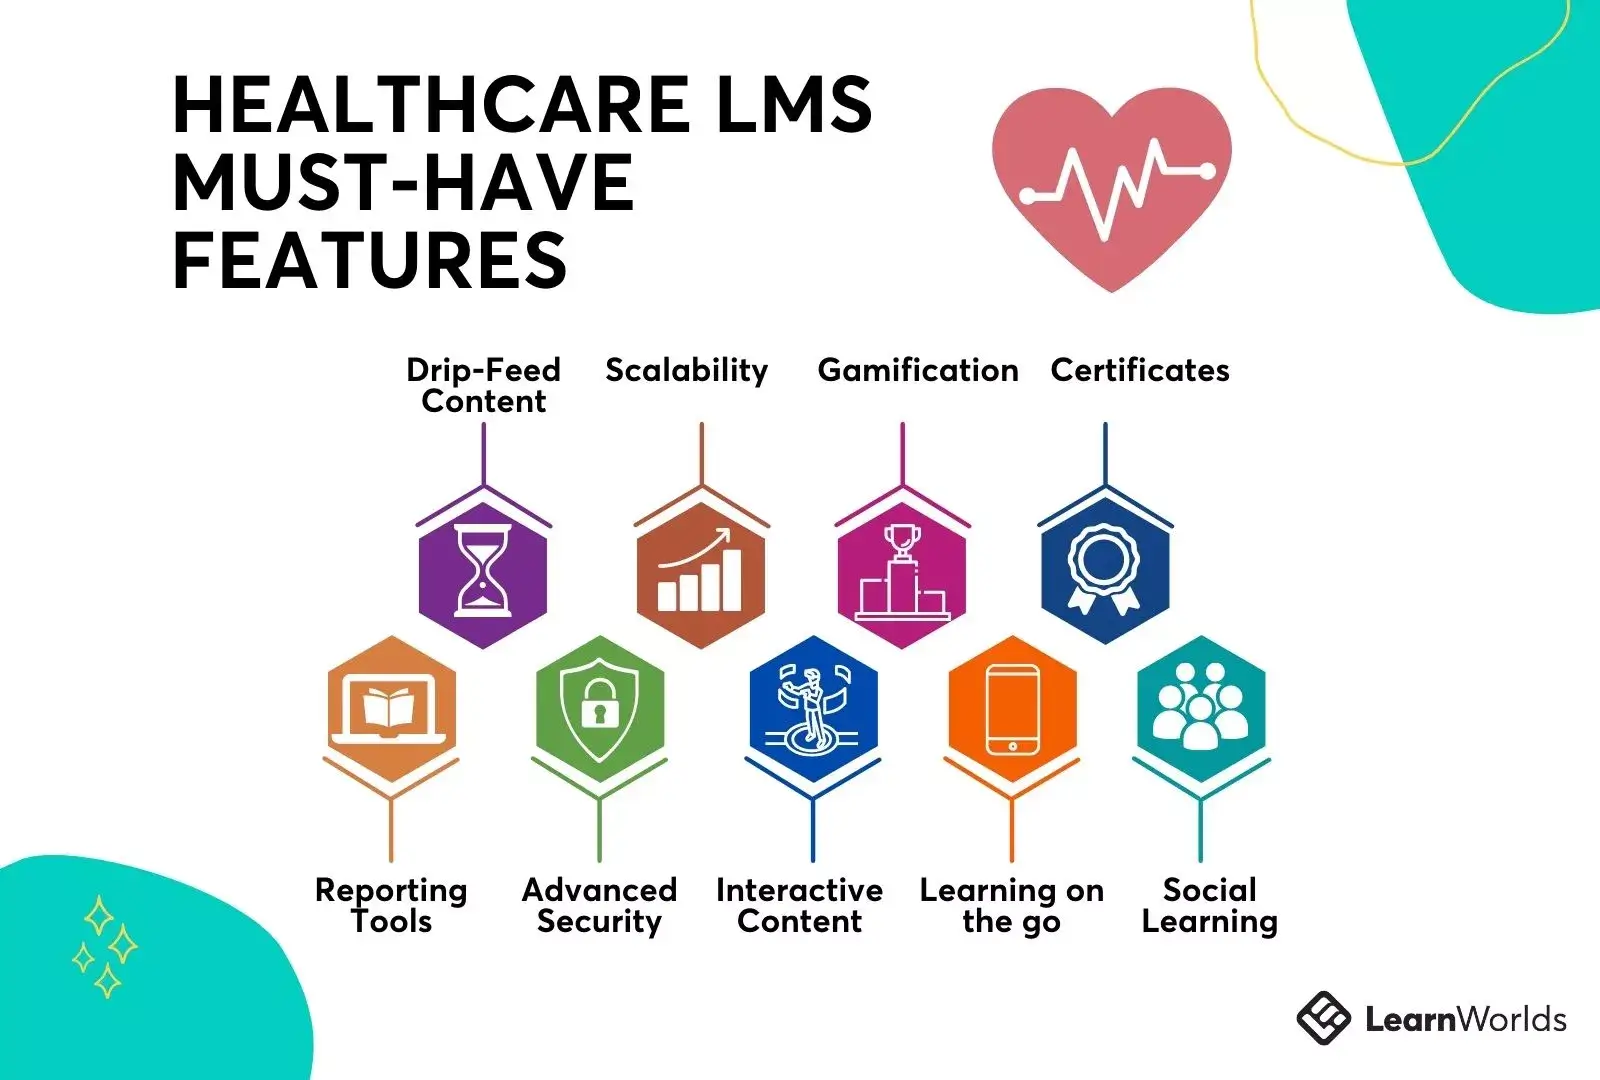 Visualizing the 9 features every LMS for healthcare must have.